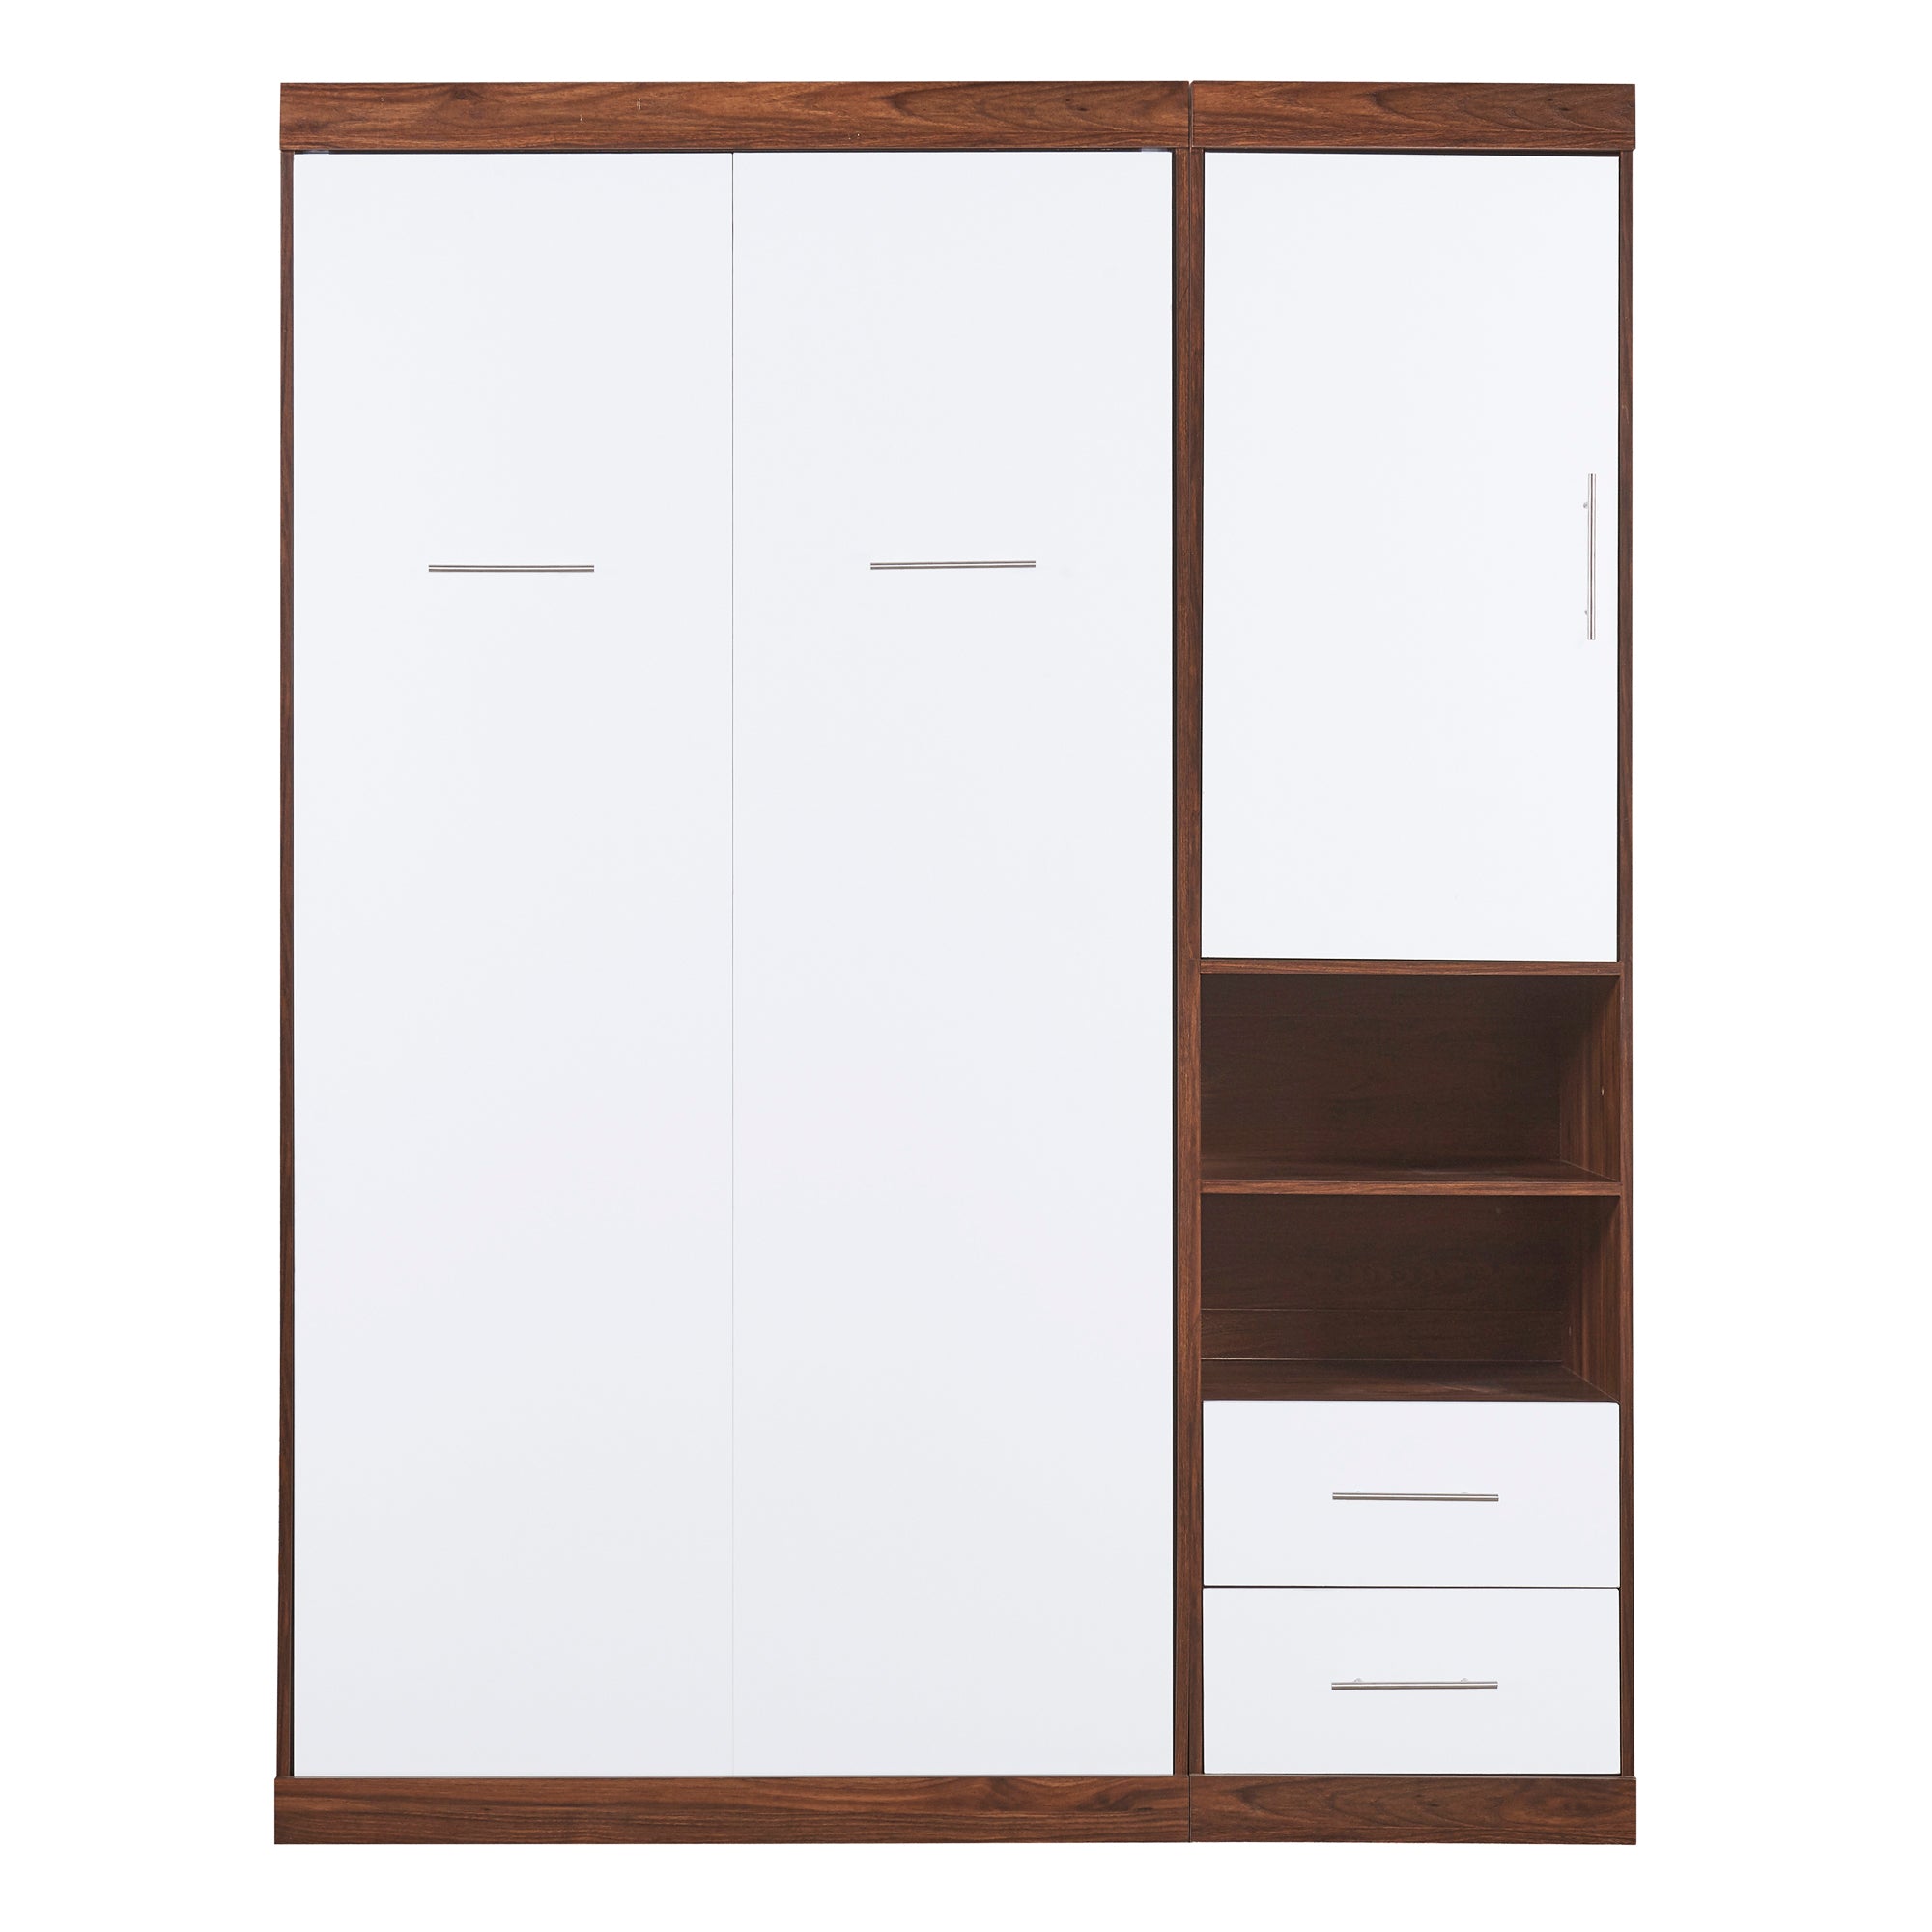 Bellemave® Murphy Bed Wall Bed with Cabinet Bellemave®